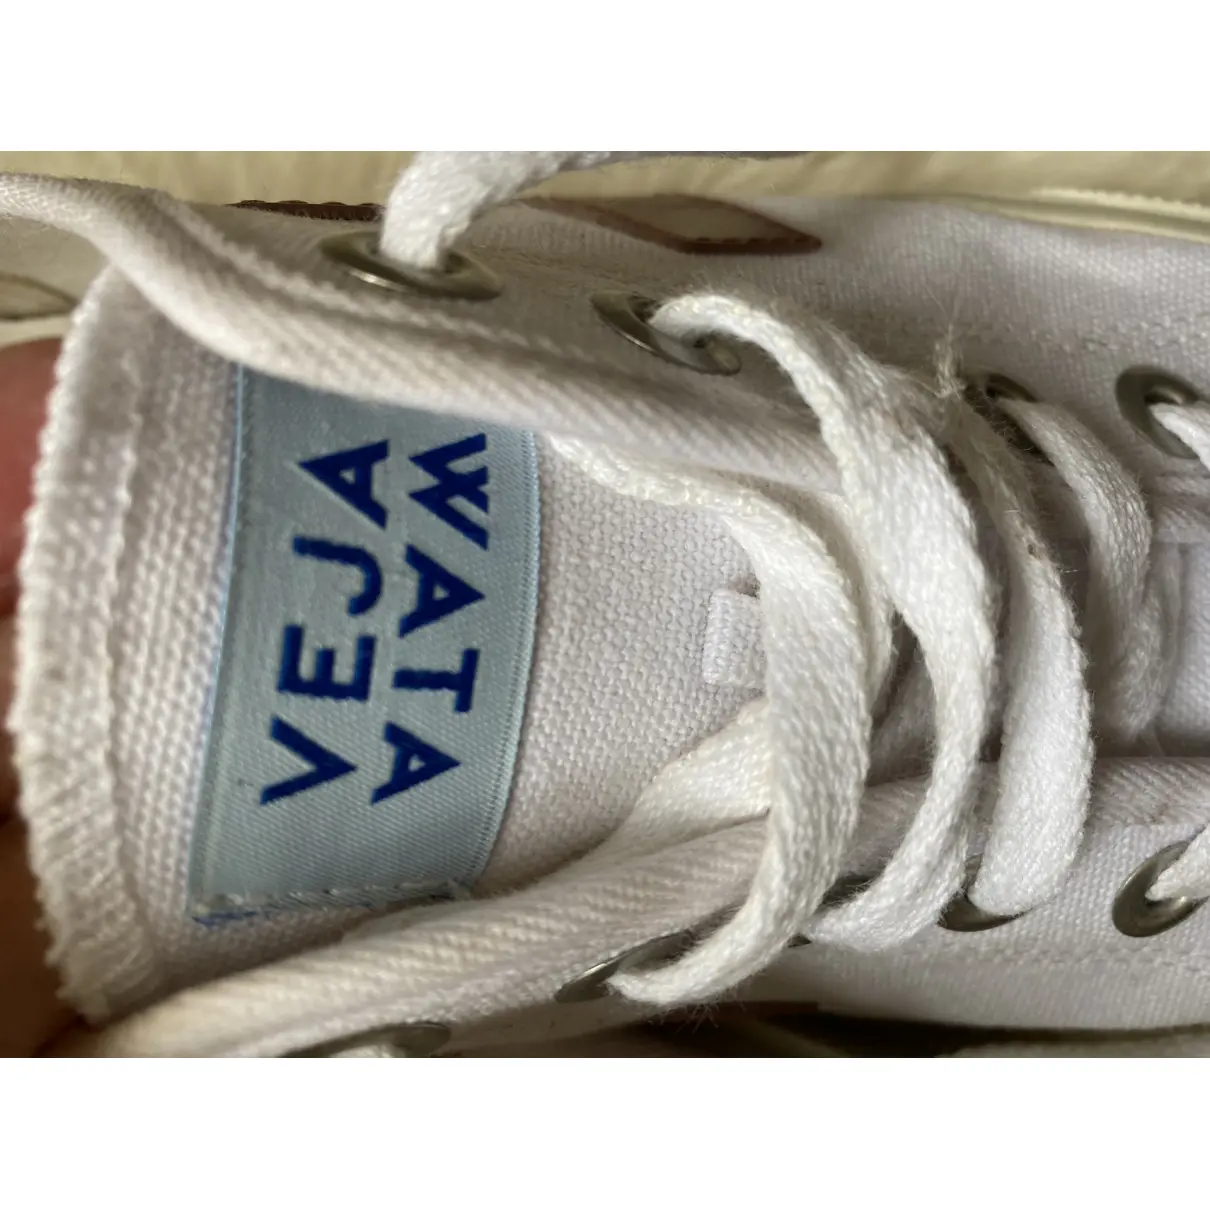 Buy Veja Cloth trainers online